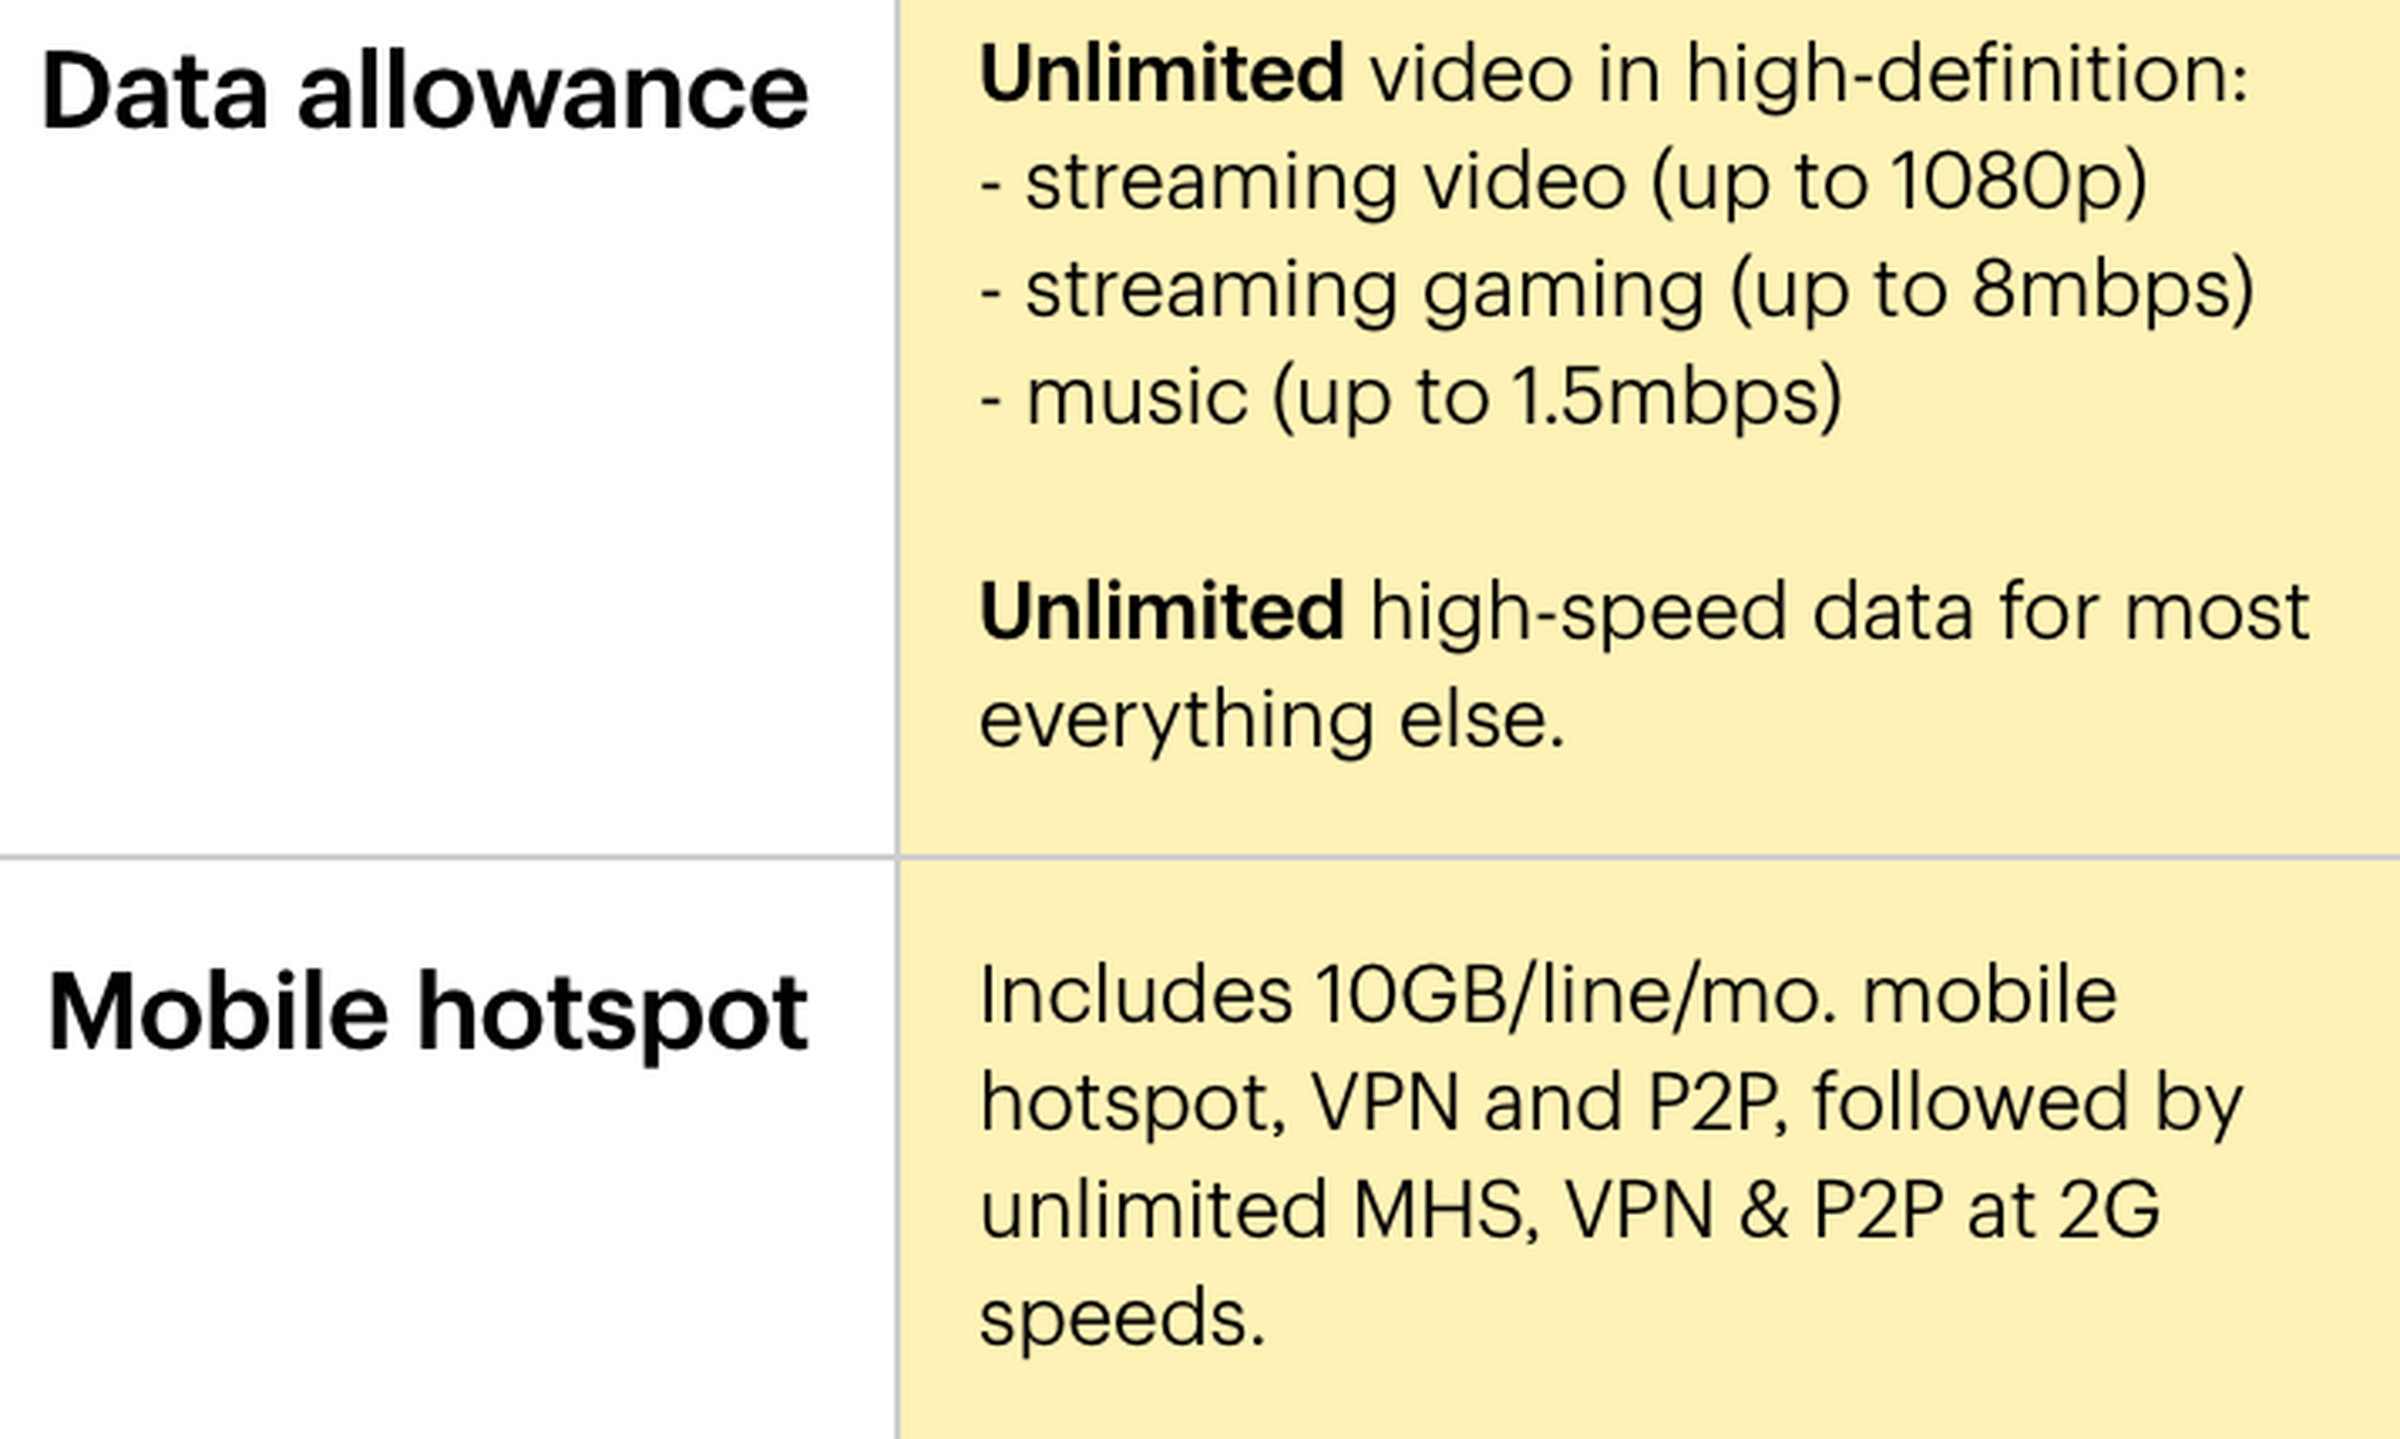 Sprint doesn’t restrict video quality, but has speed limits in place elsewhere.